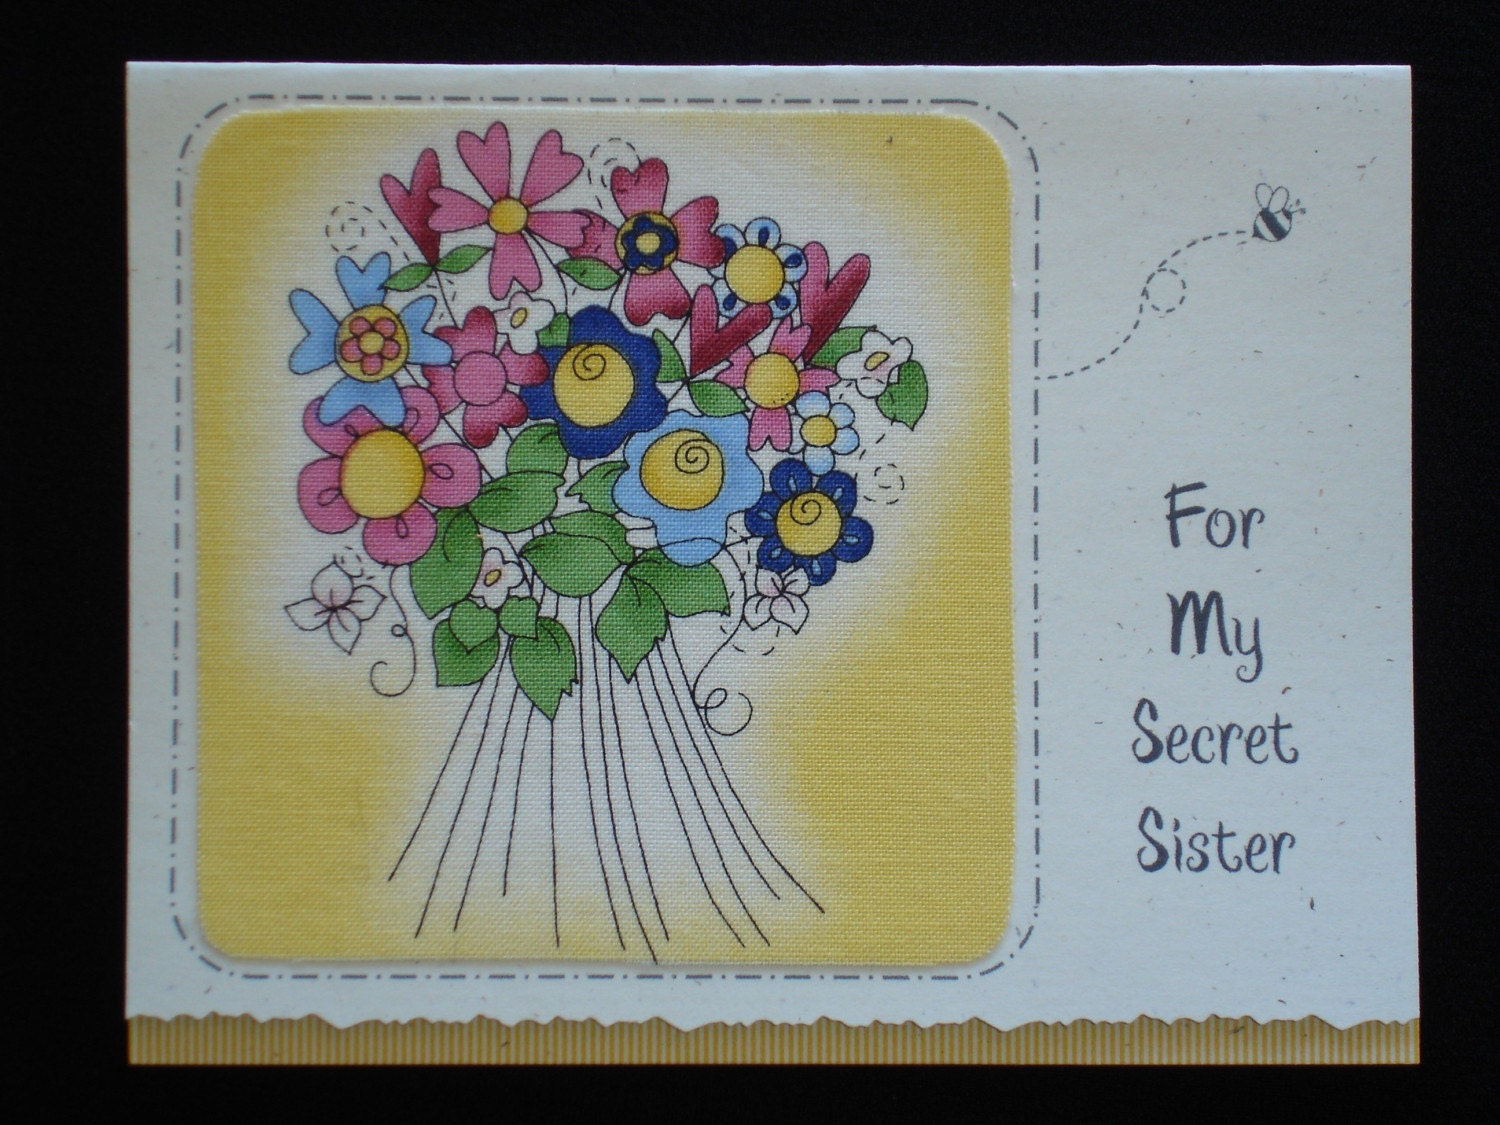 secret sister birthday card by lynelle fb45 designed with